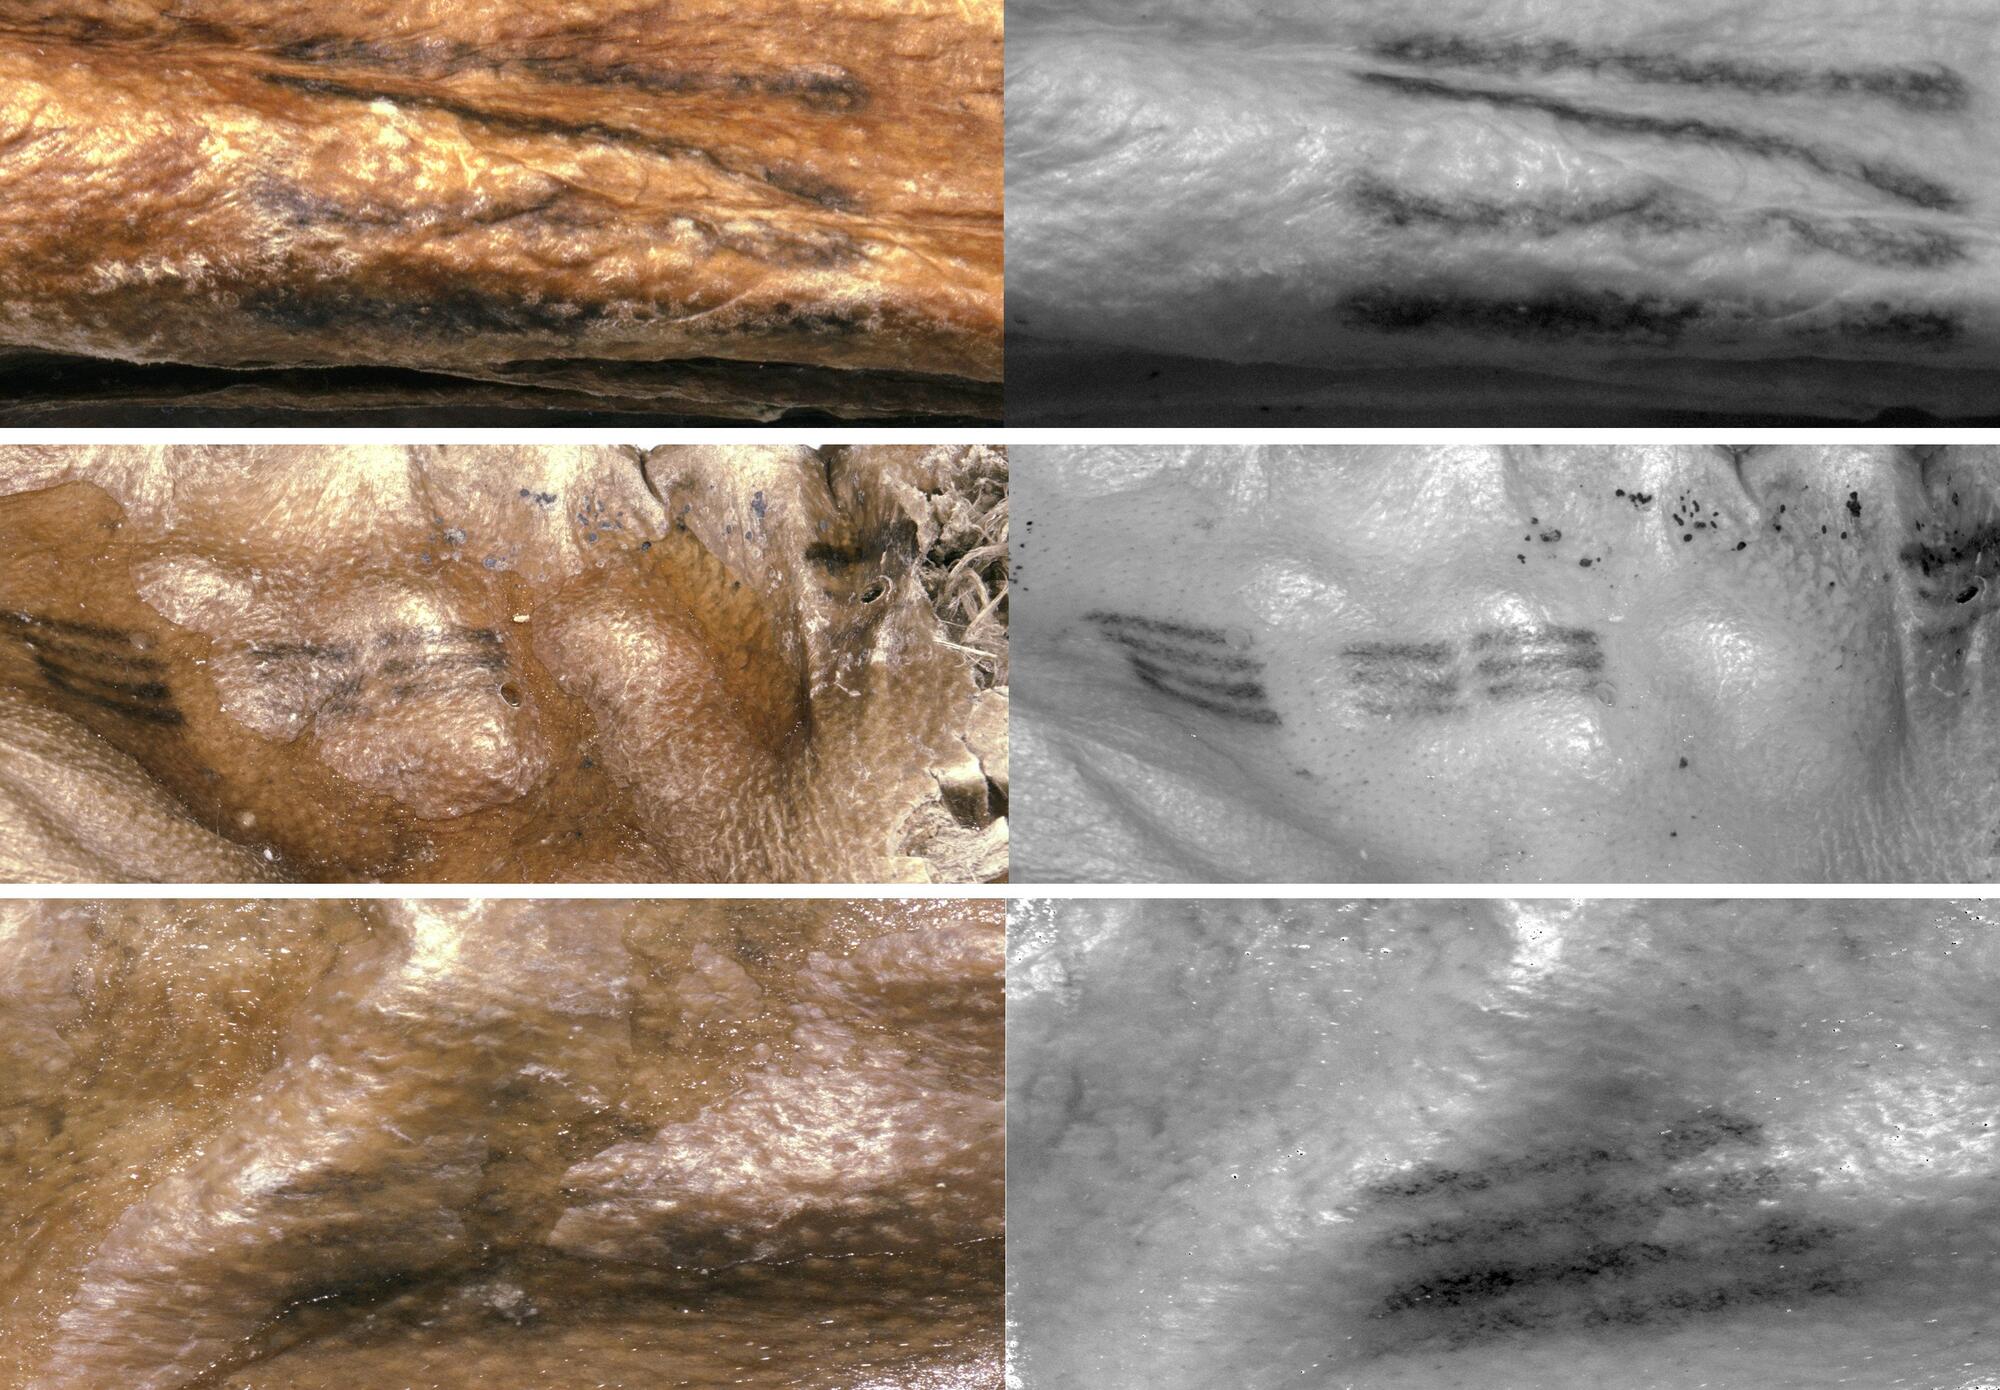 Ptmvikctwvg2jhdjosgb7pjekq - ötzi the iceman's tattoos: what the oldest tattoos ever discovered meant for our copper age ancestors